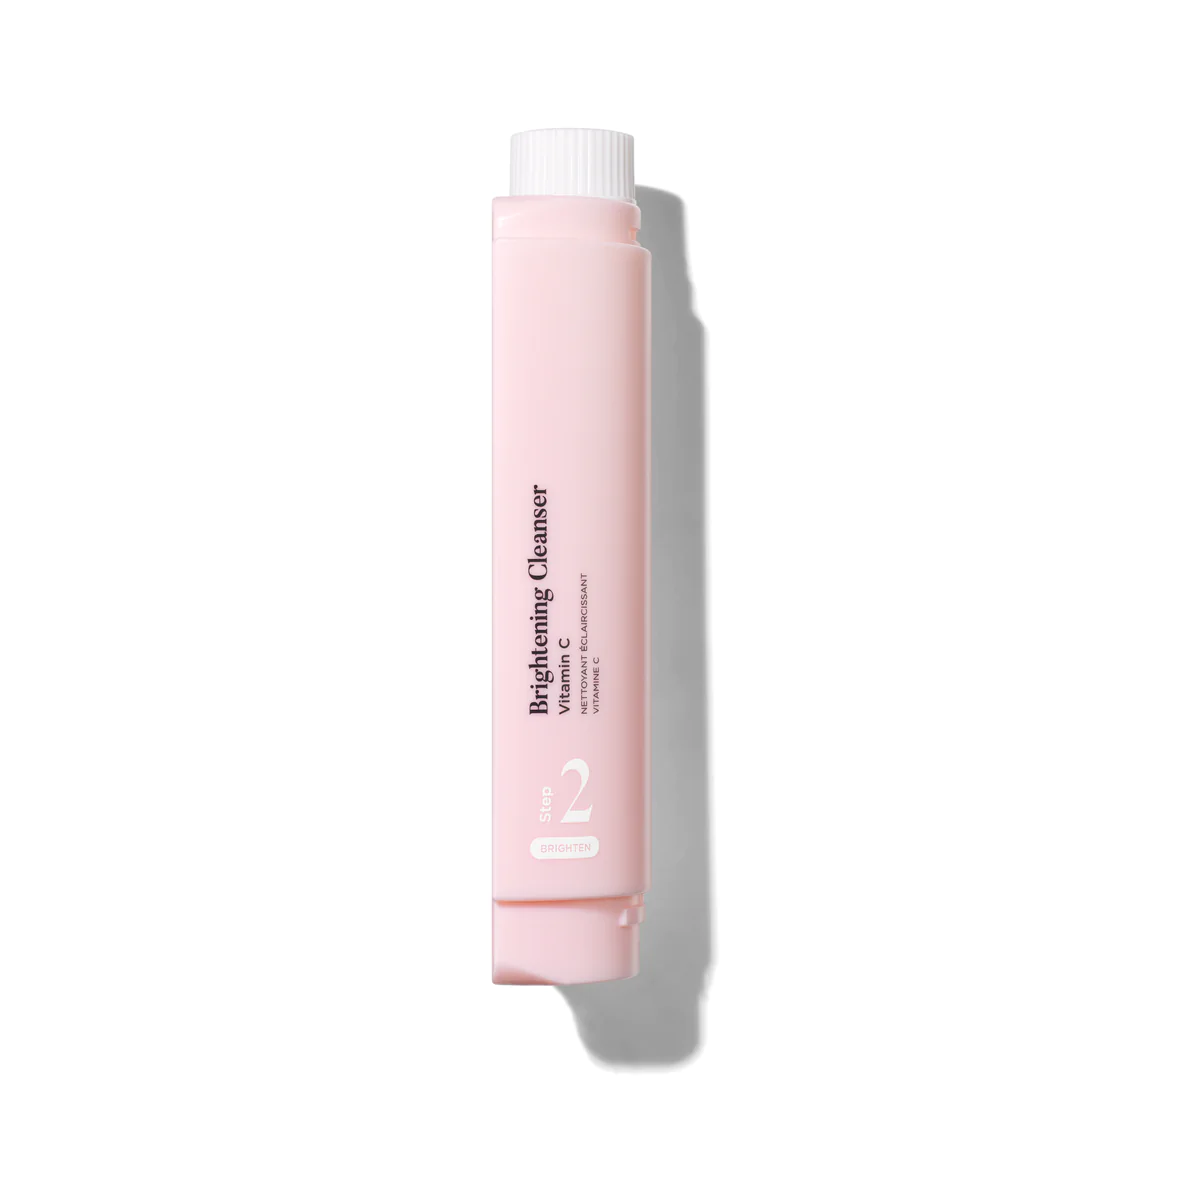 Sculpted By Aimee Connolly DuoCleanse Brightening Refill